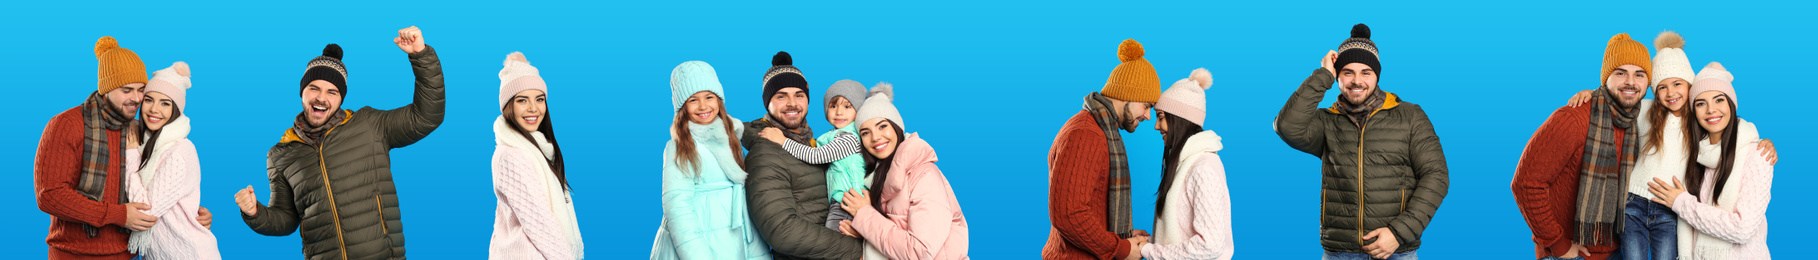 Collage with photos of people wearing warm clothes on blue background, banner design. Winter vacation